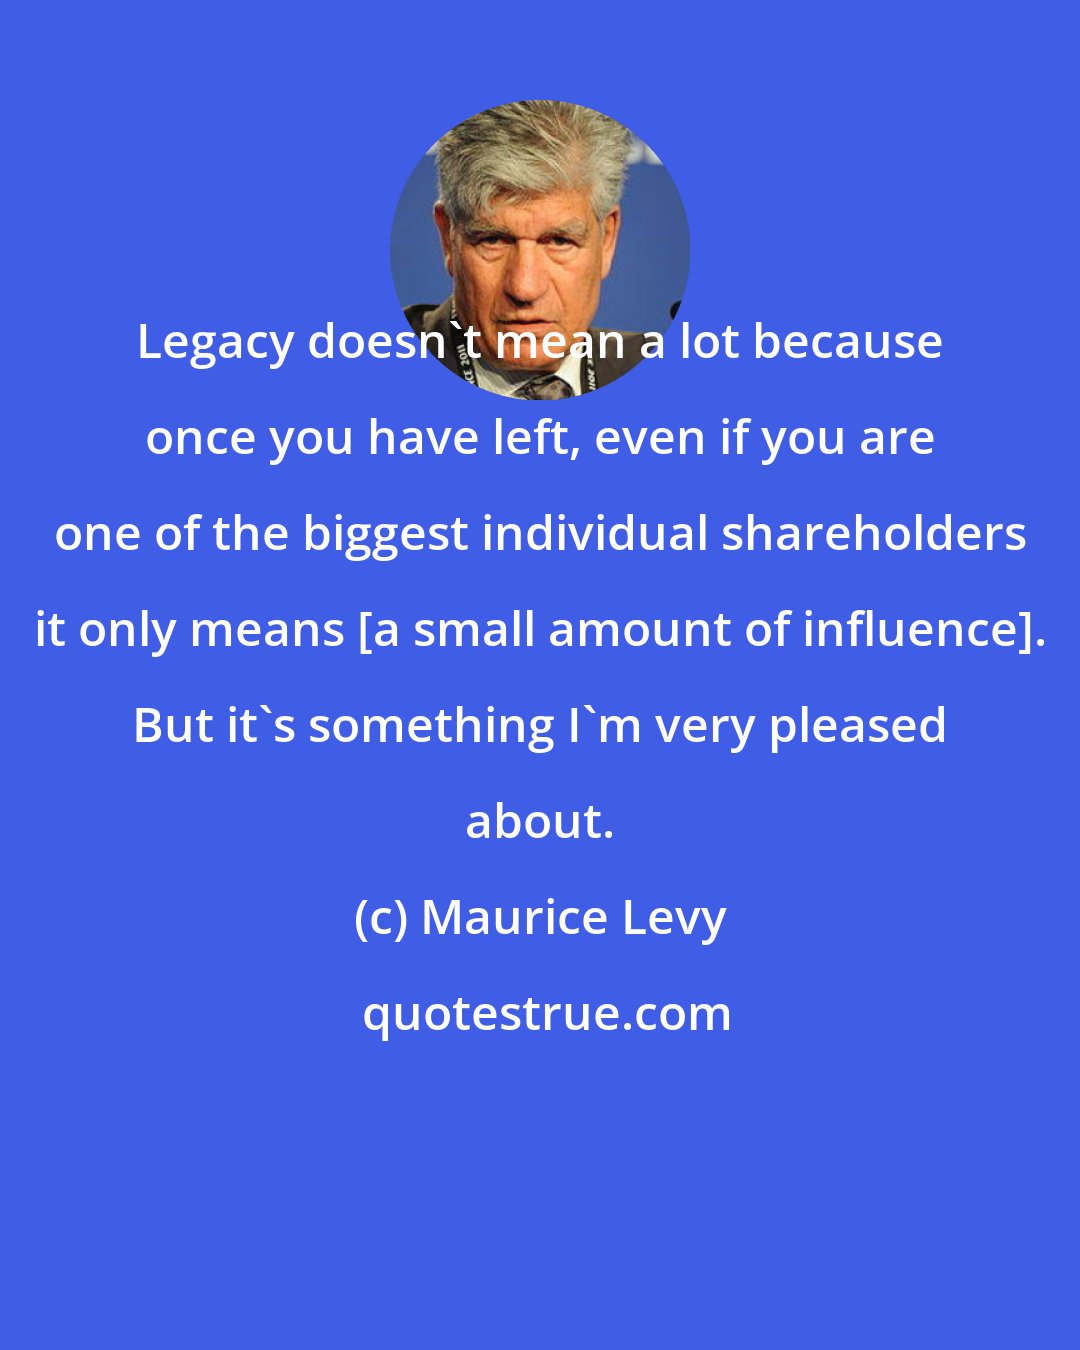 Maurice Levy: Legacy doesn't mean a lot because once you have left, even if you are one of the biggest individual shareholders it only means [a small amount of influence]. But it's something I'm very pleased about.